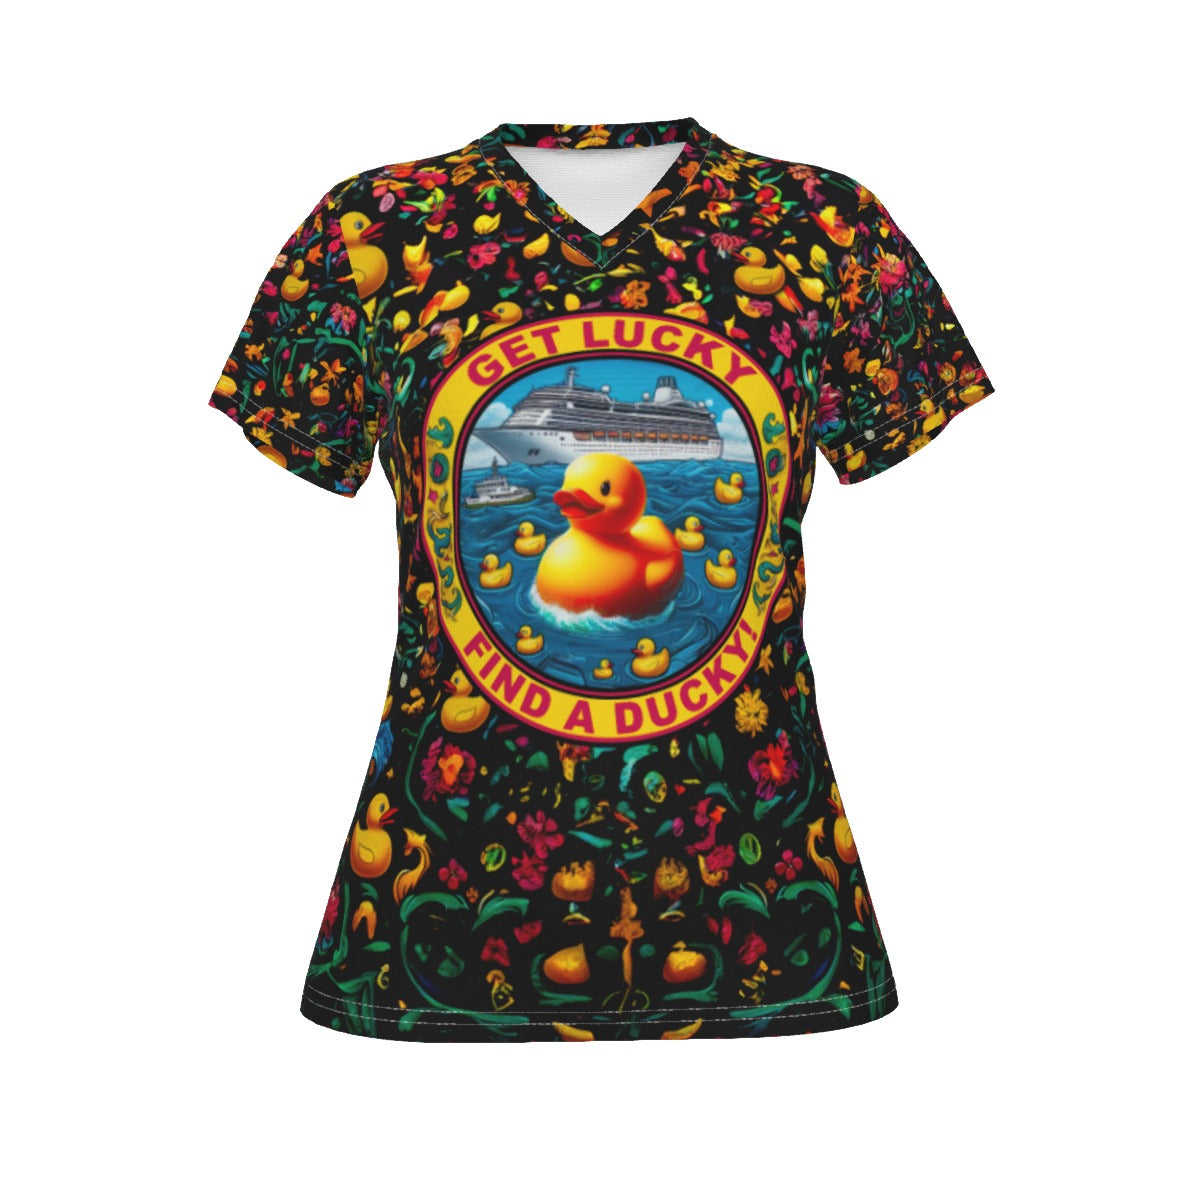 Get Lucky, Find a Ducky Cruise Tee